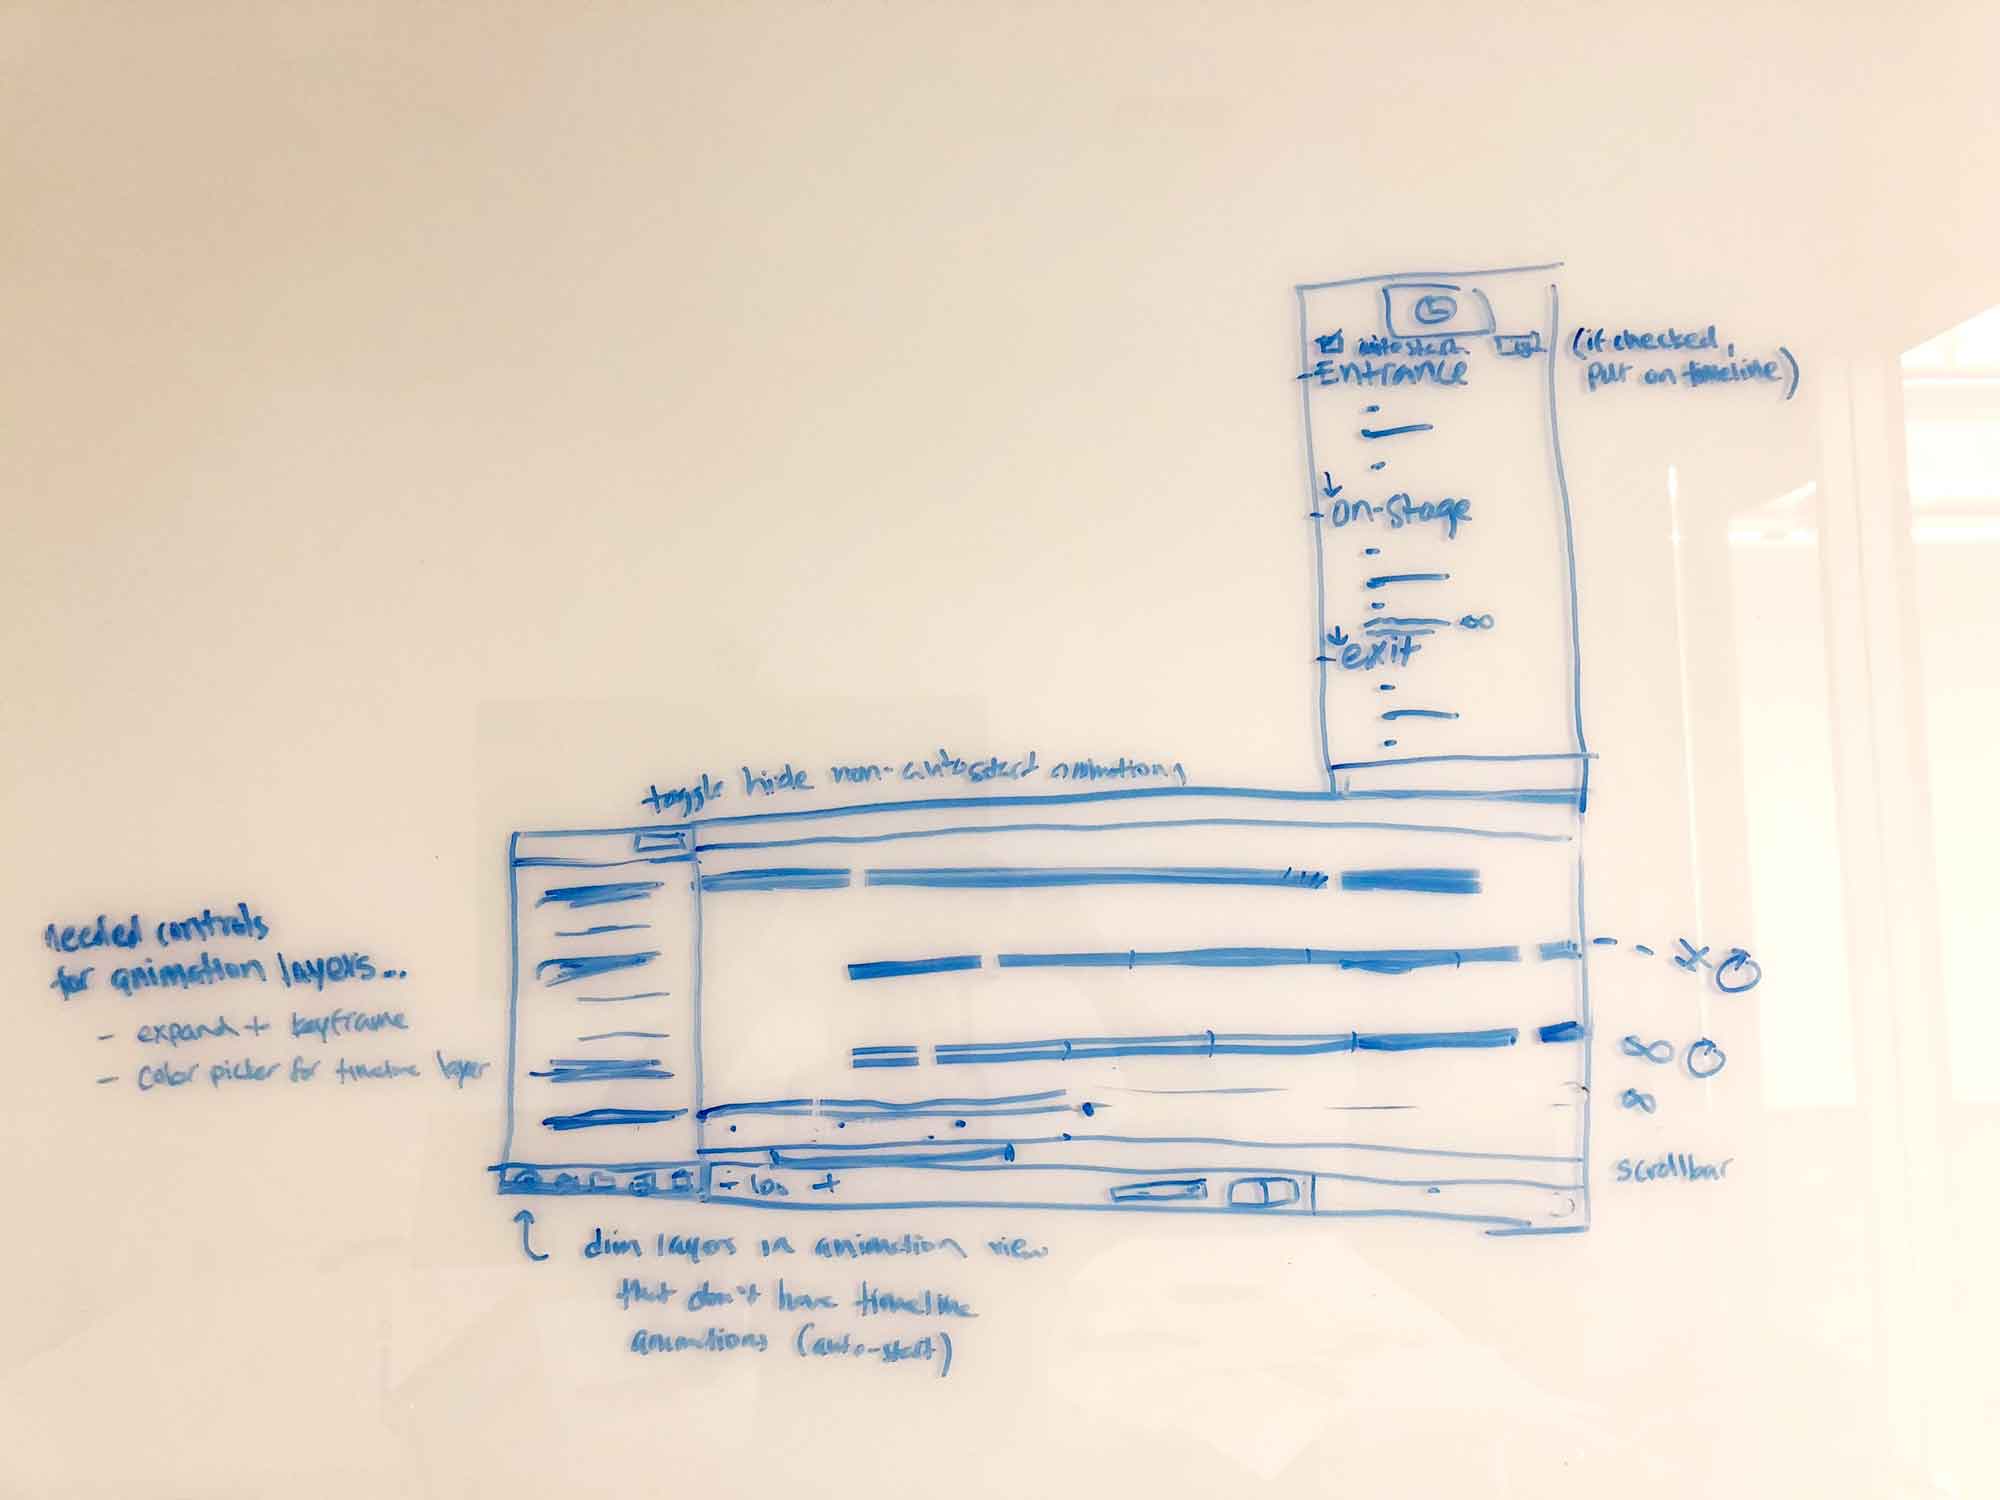 Some whiteboard sketches from a user interview session going over some of the major use cases for Timeline vs Event Based Animations.